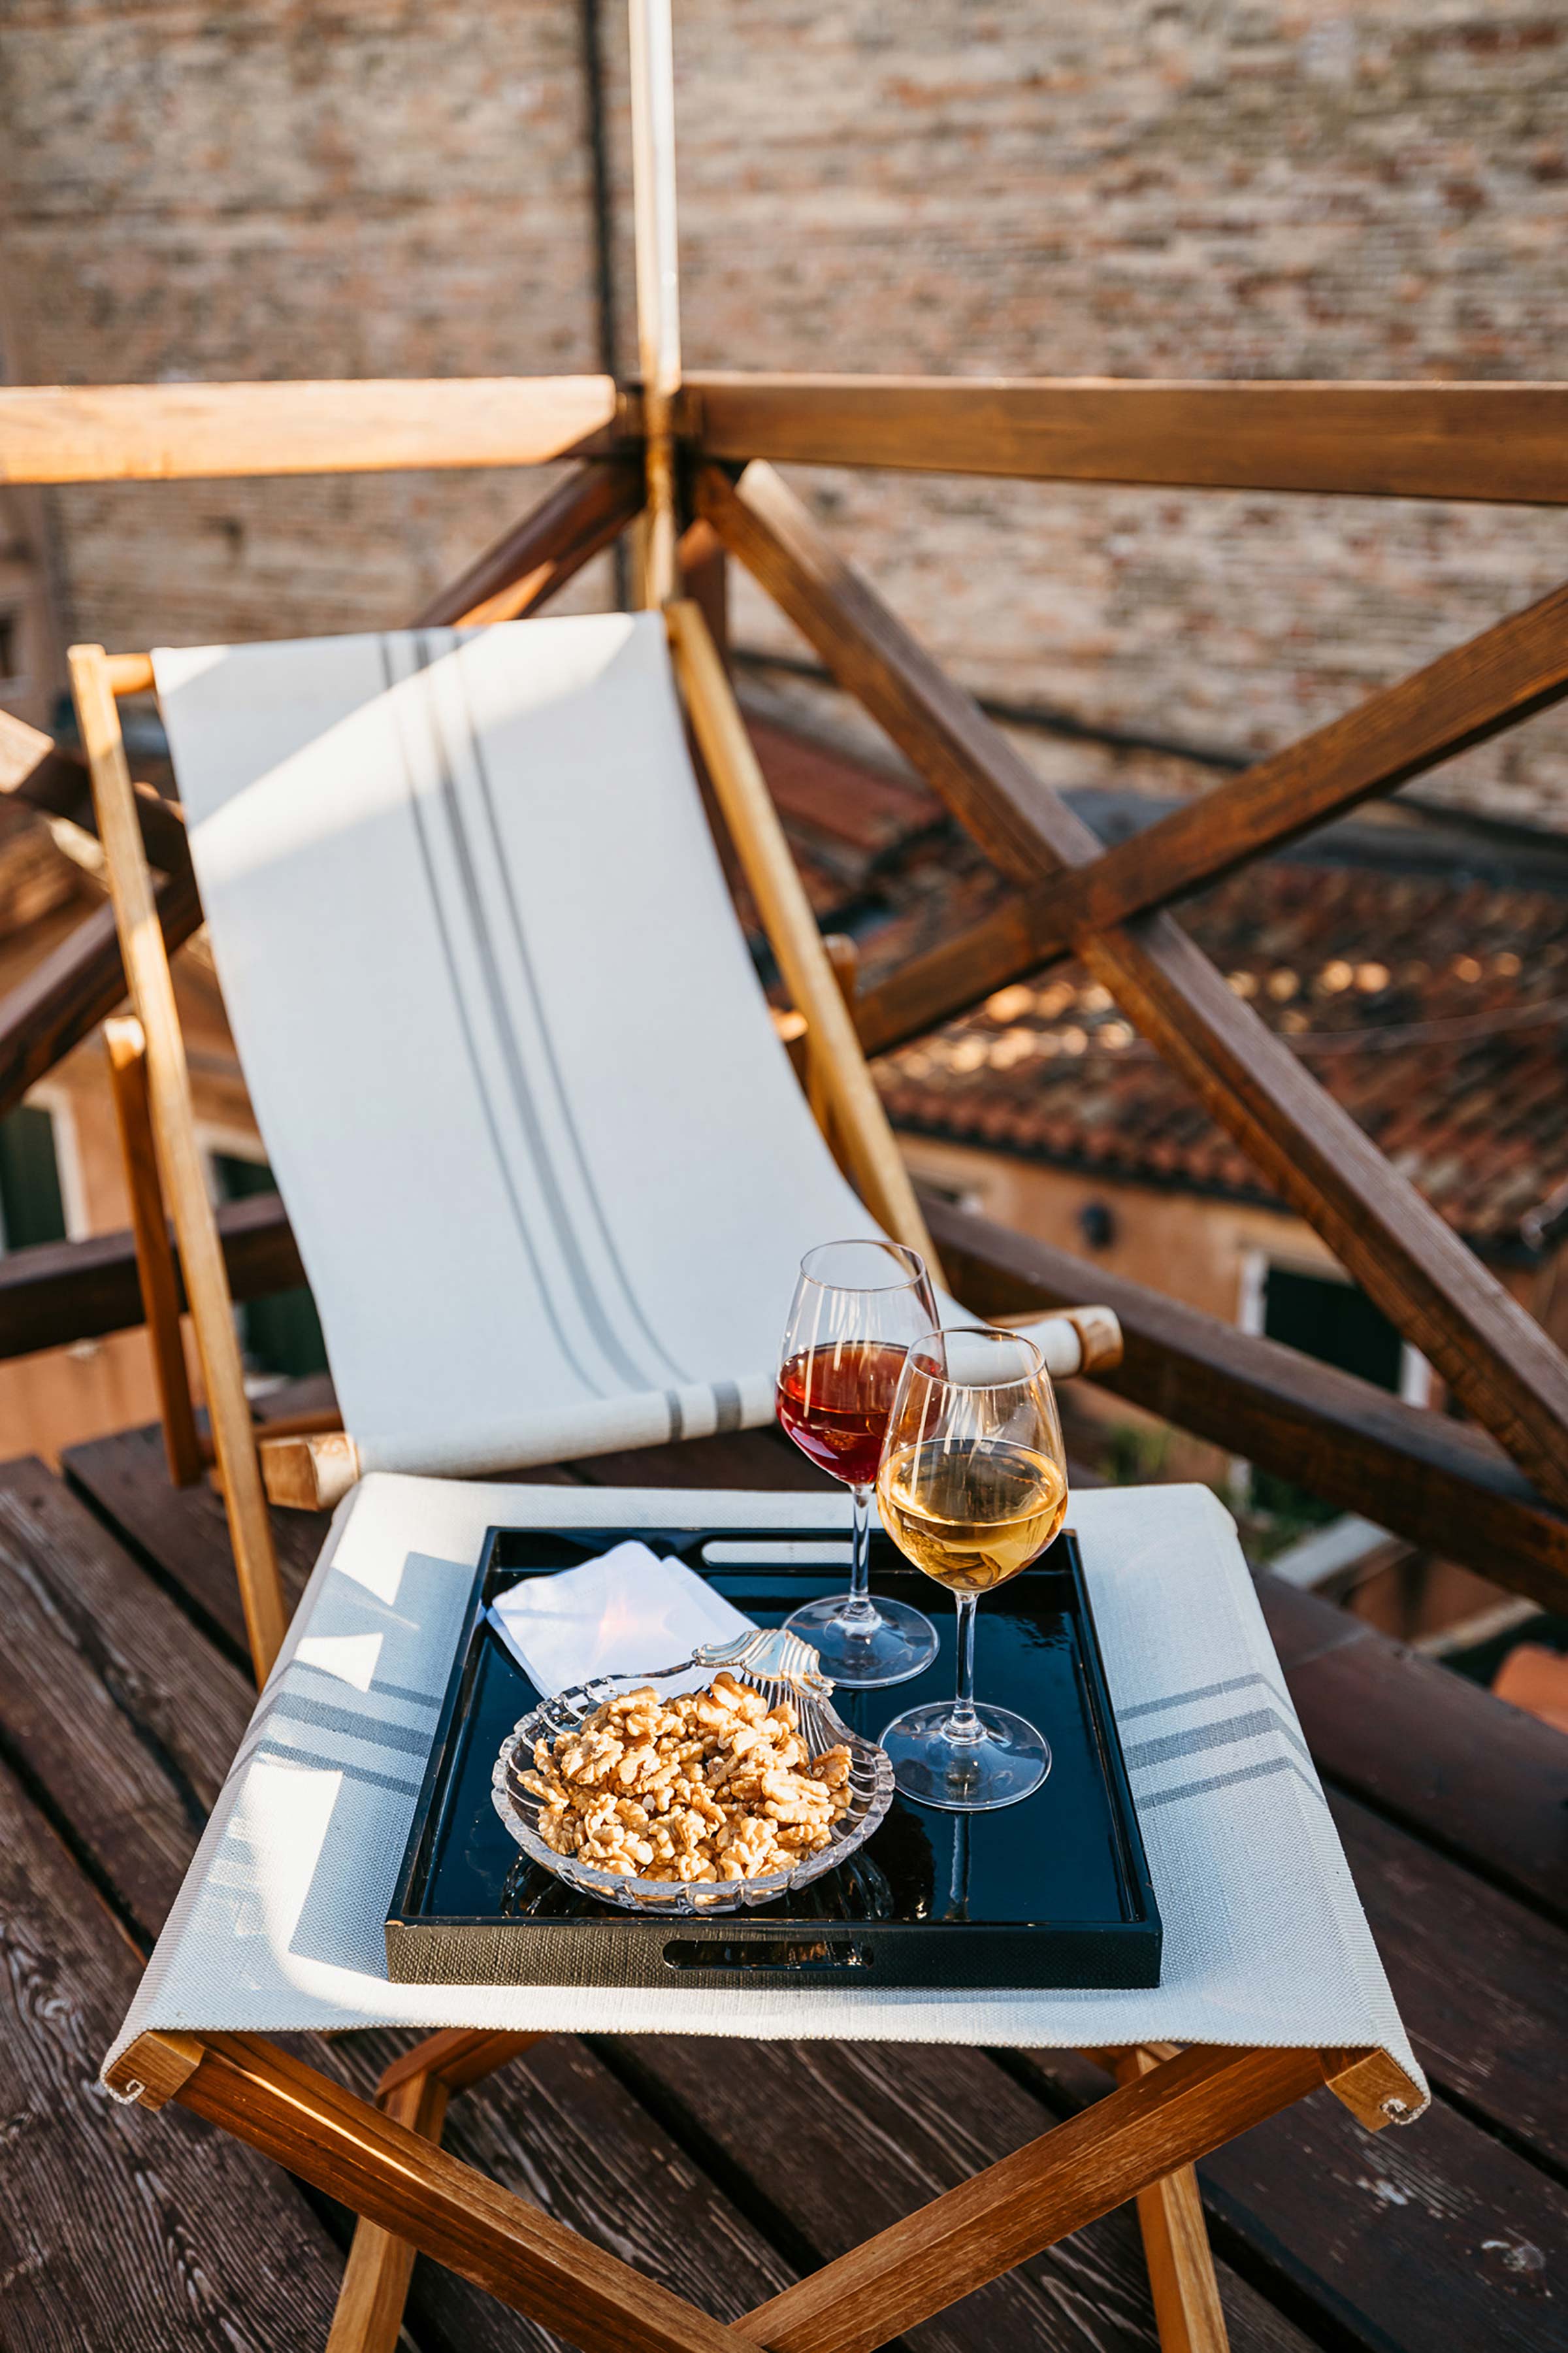 relax and enjoy an aperitive at sunset on the rooftops